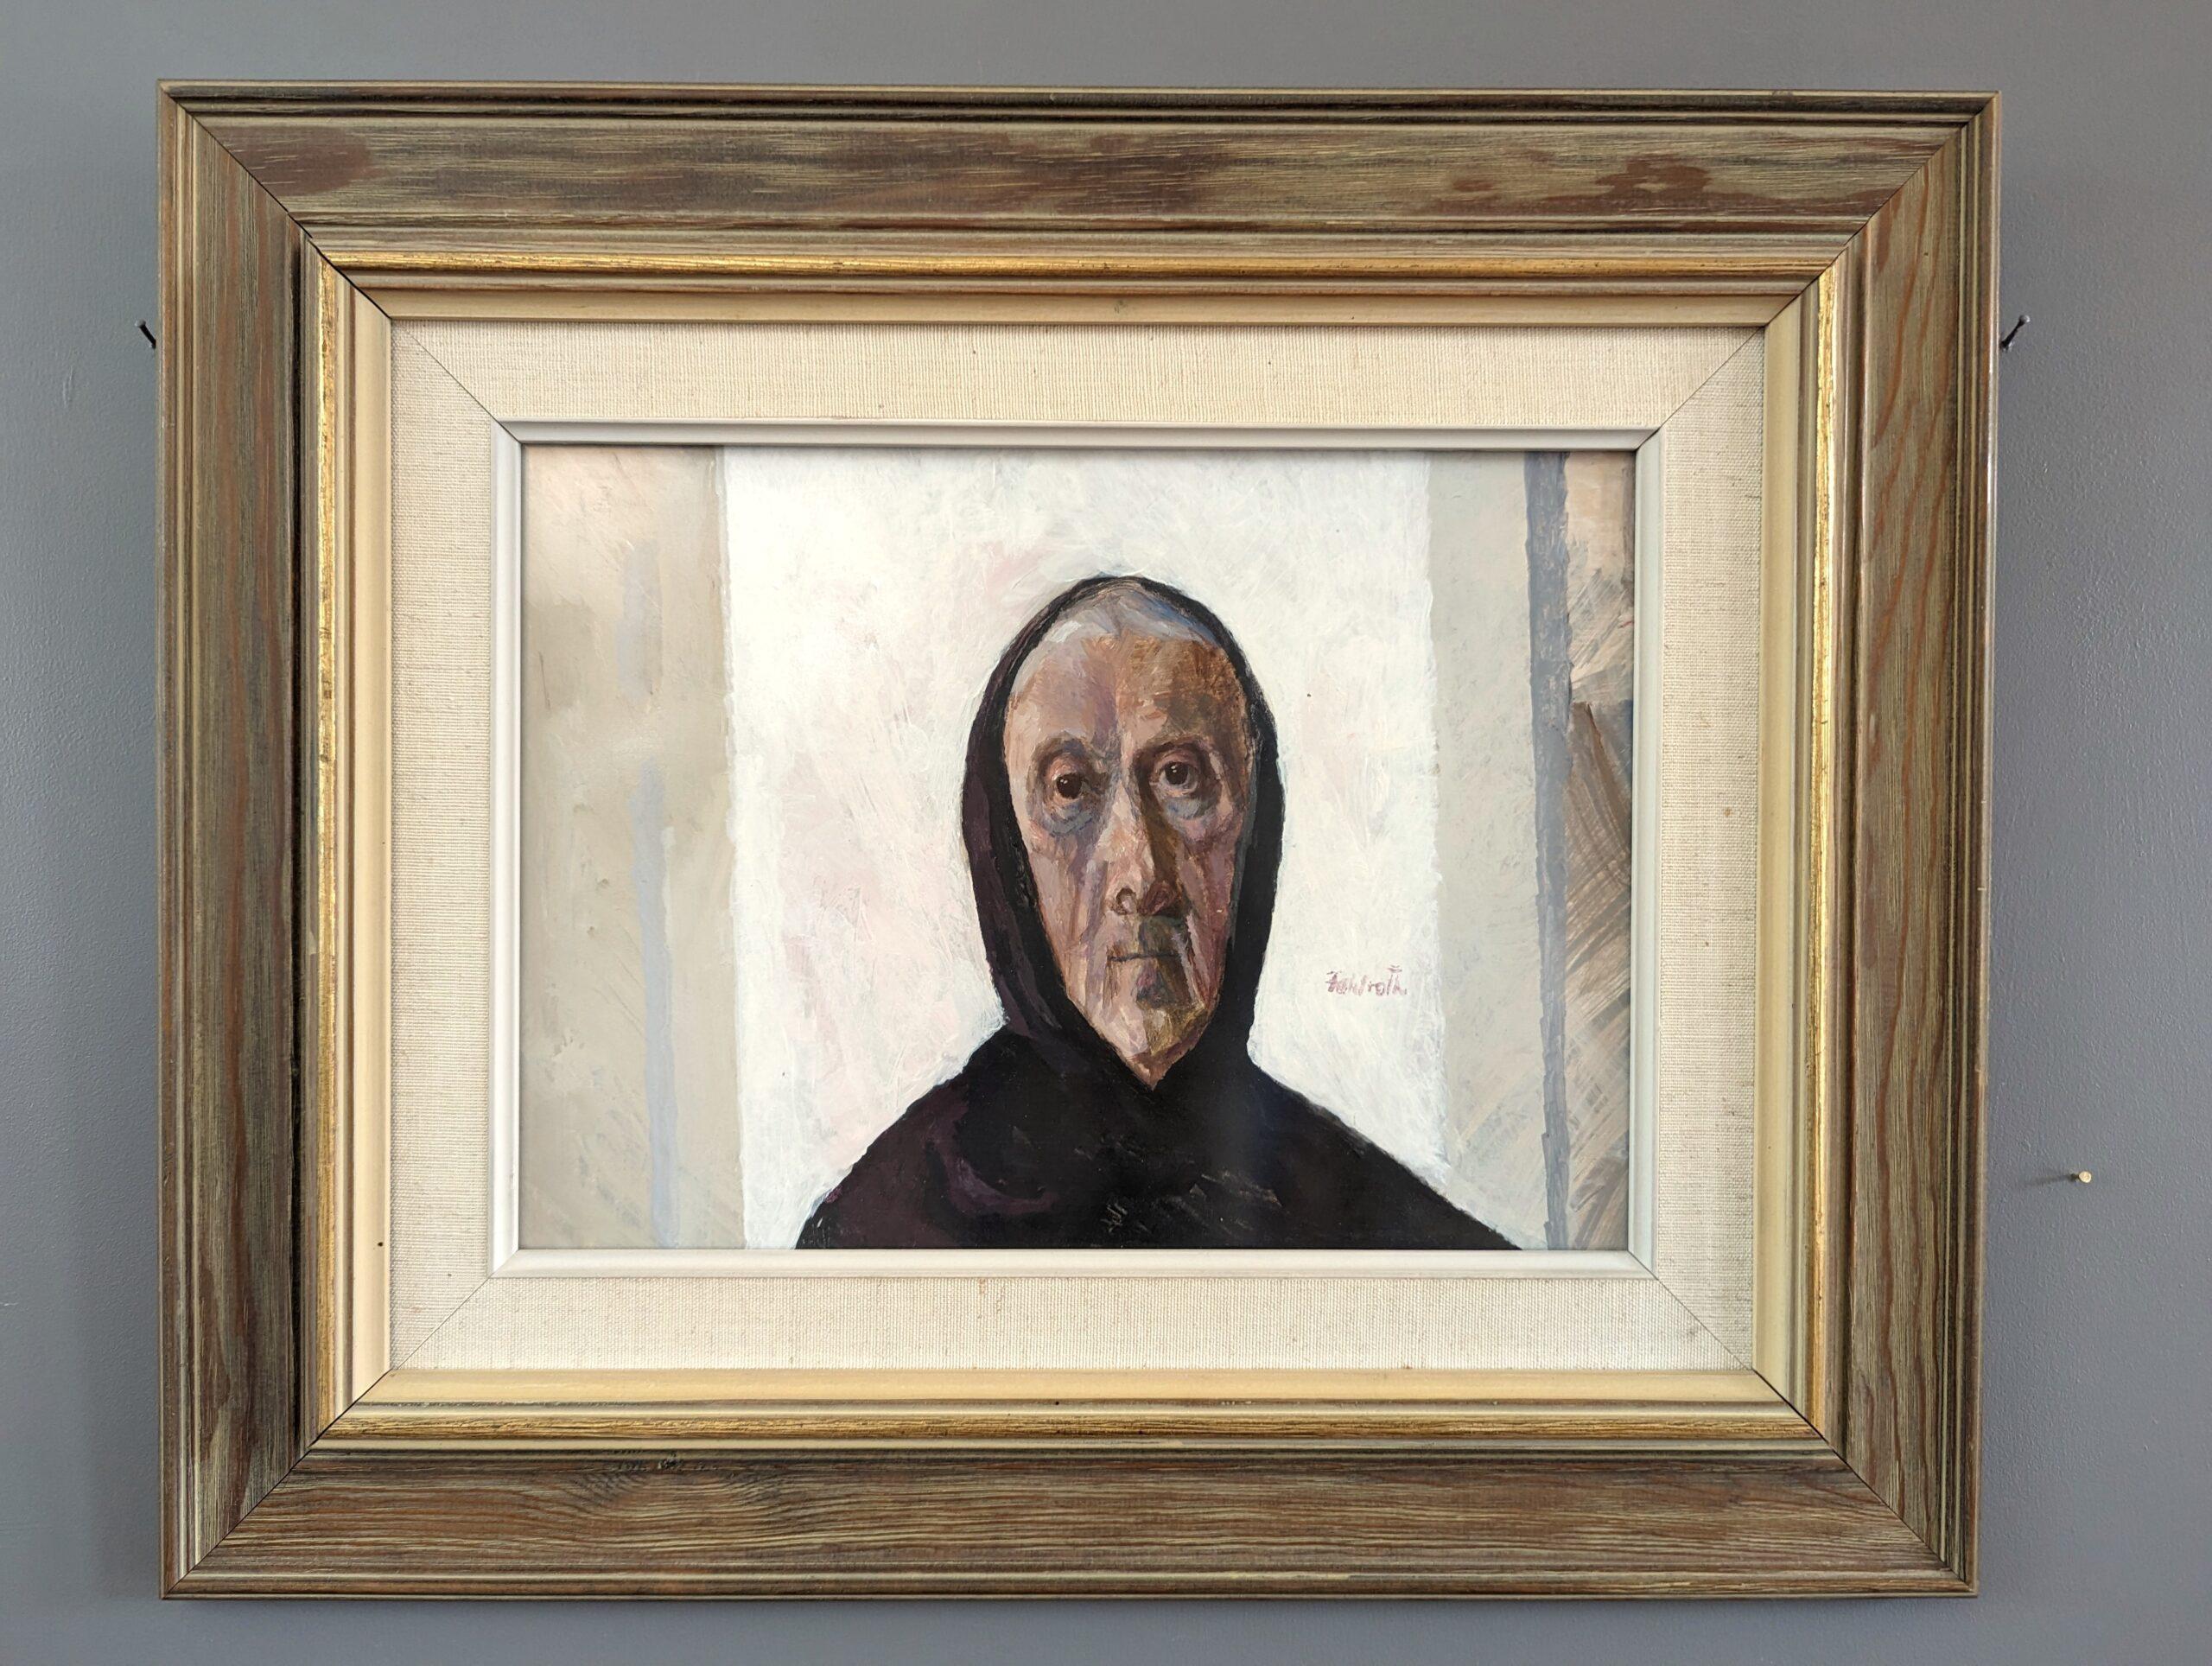 MELLOWING
Oil on Board 
Size: 40.5 x 49 cm (including frame)

A wonderfully expressive and brilliantly executed figurative portrait composition, painted in oil onto board.

Against a soothing white and cream backdrop, an elderly woman stands with a